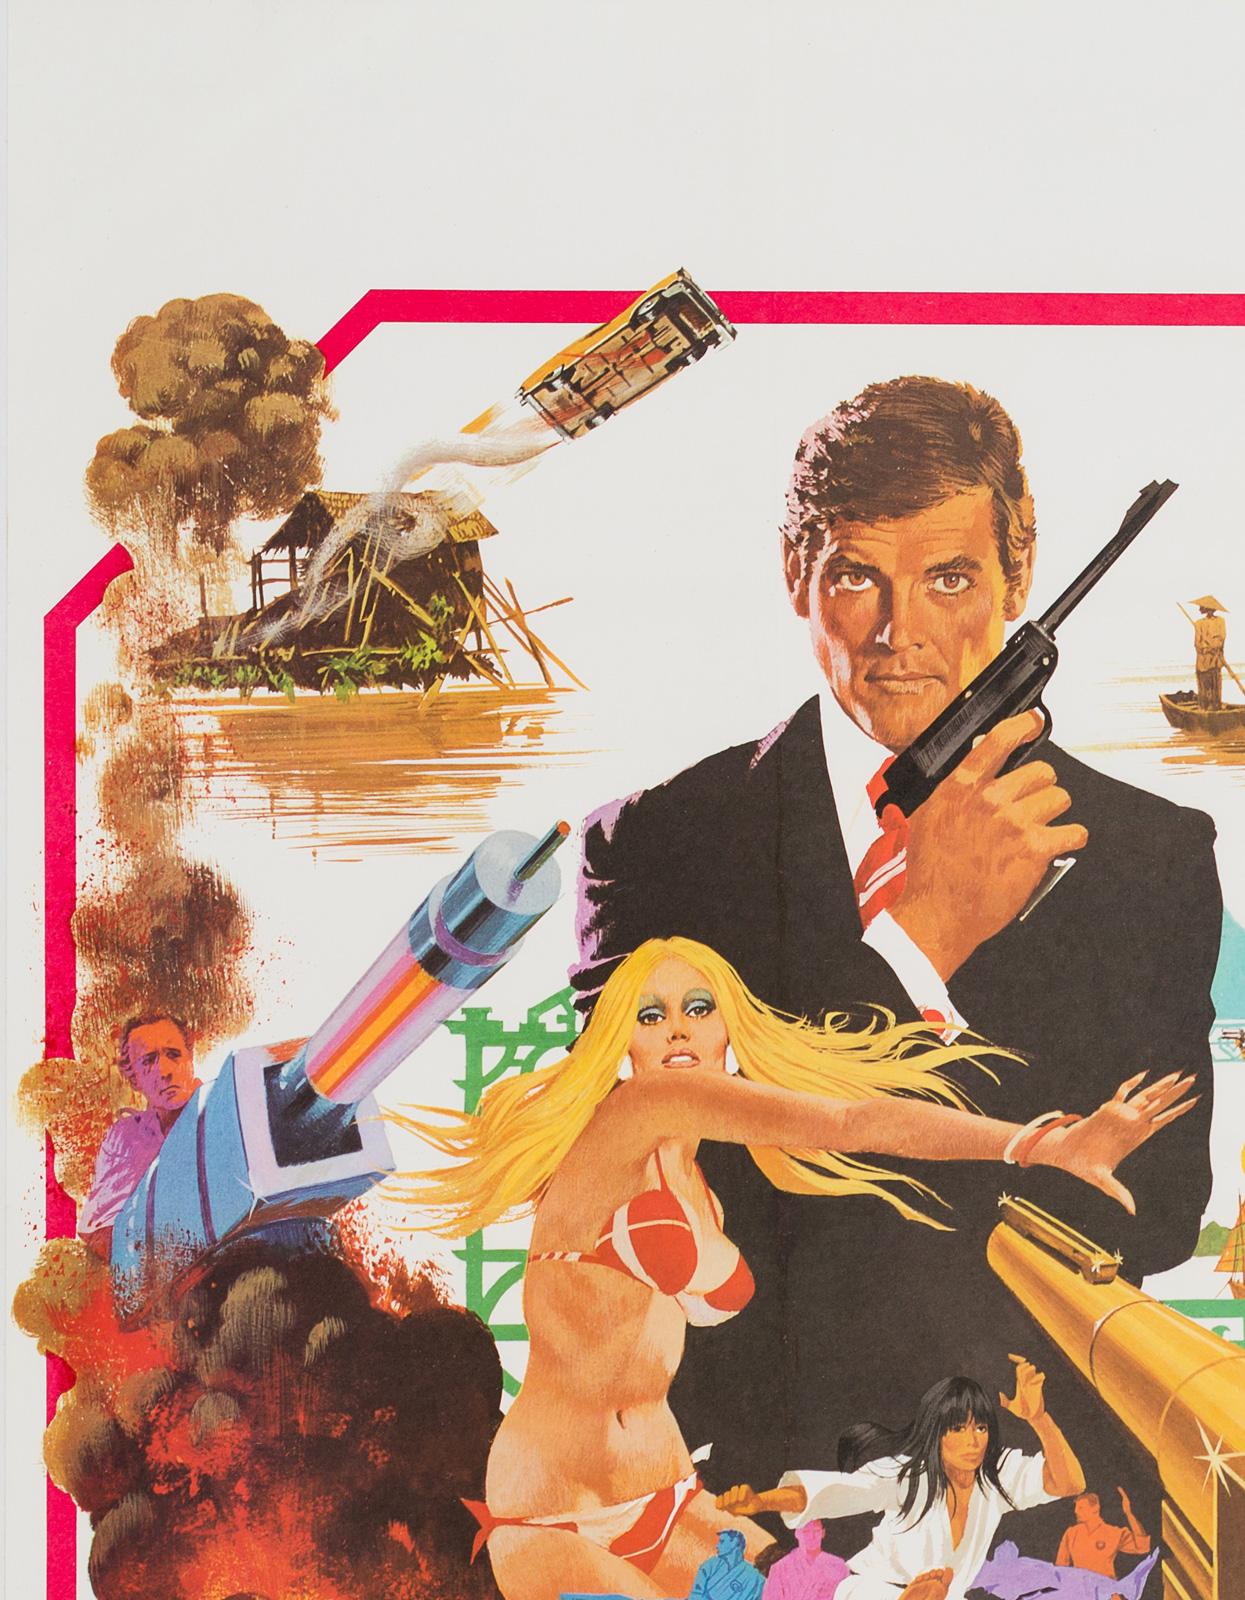 Fabulous country-of-origin British quad for the man with the golden gun, starring Roger Moore in his second outing as Mr Bond. James Bond quads always make for excellent investment pieces.

This vintage movie poster has been professionally